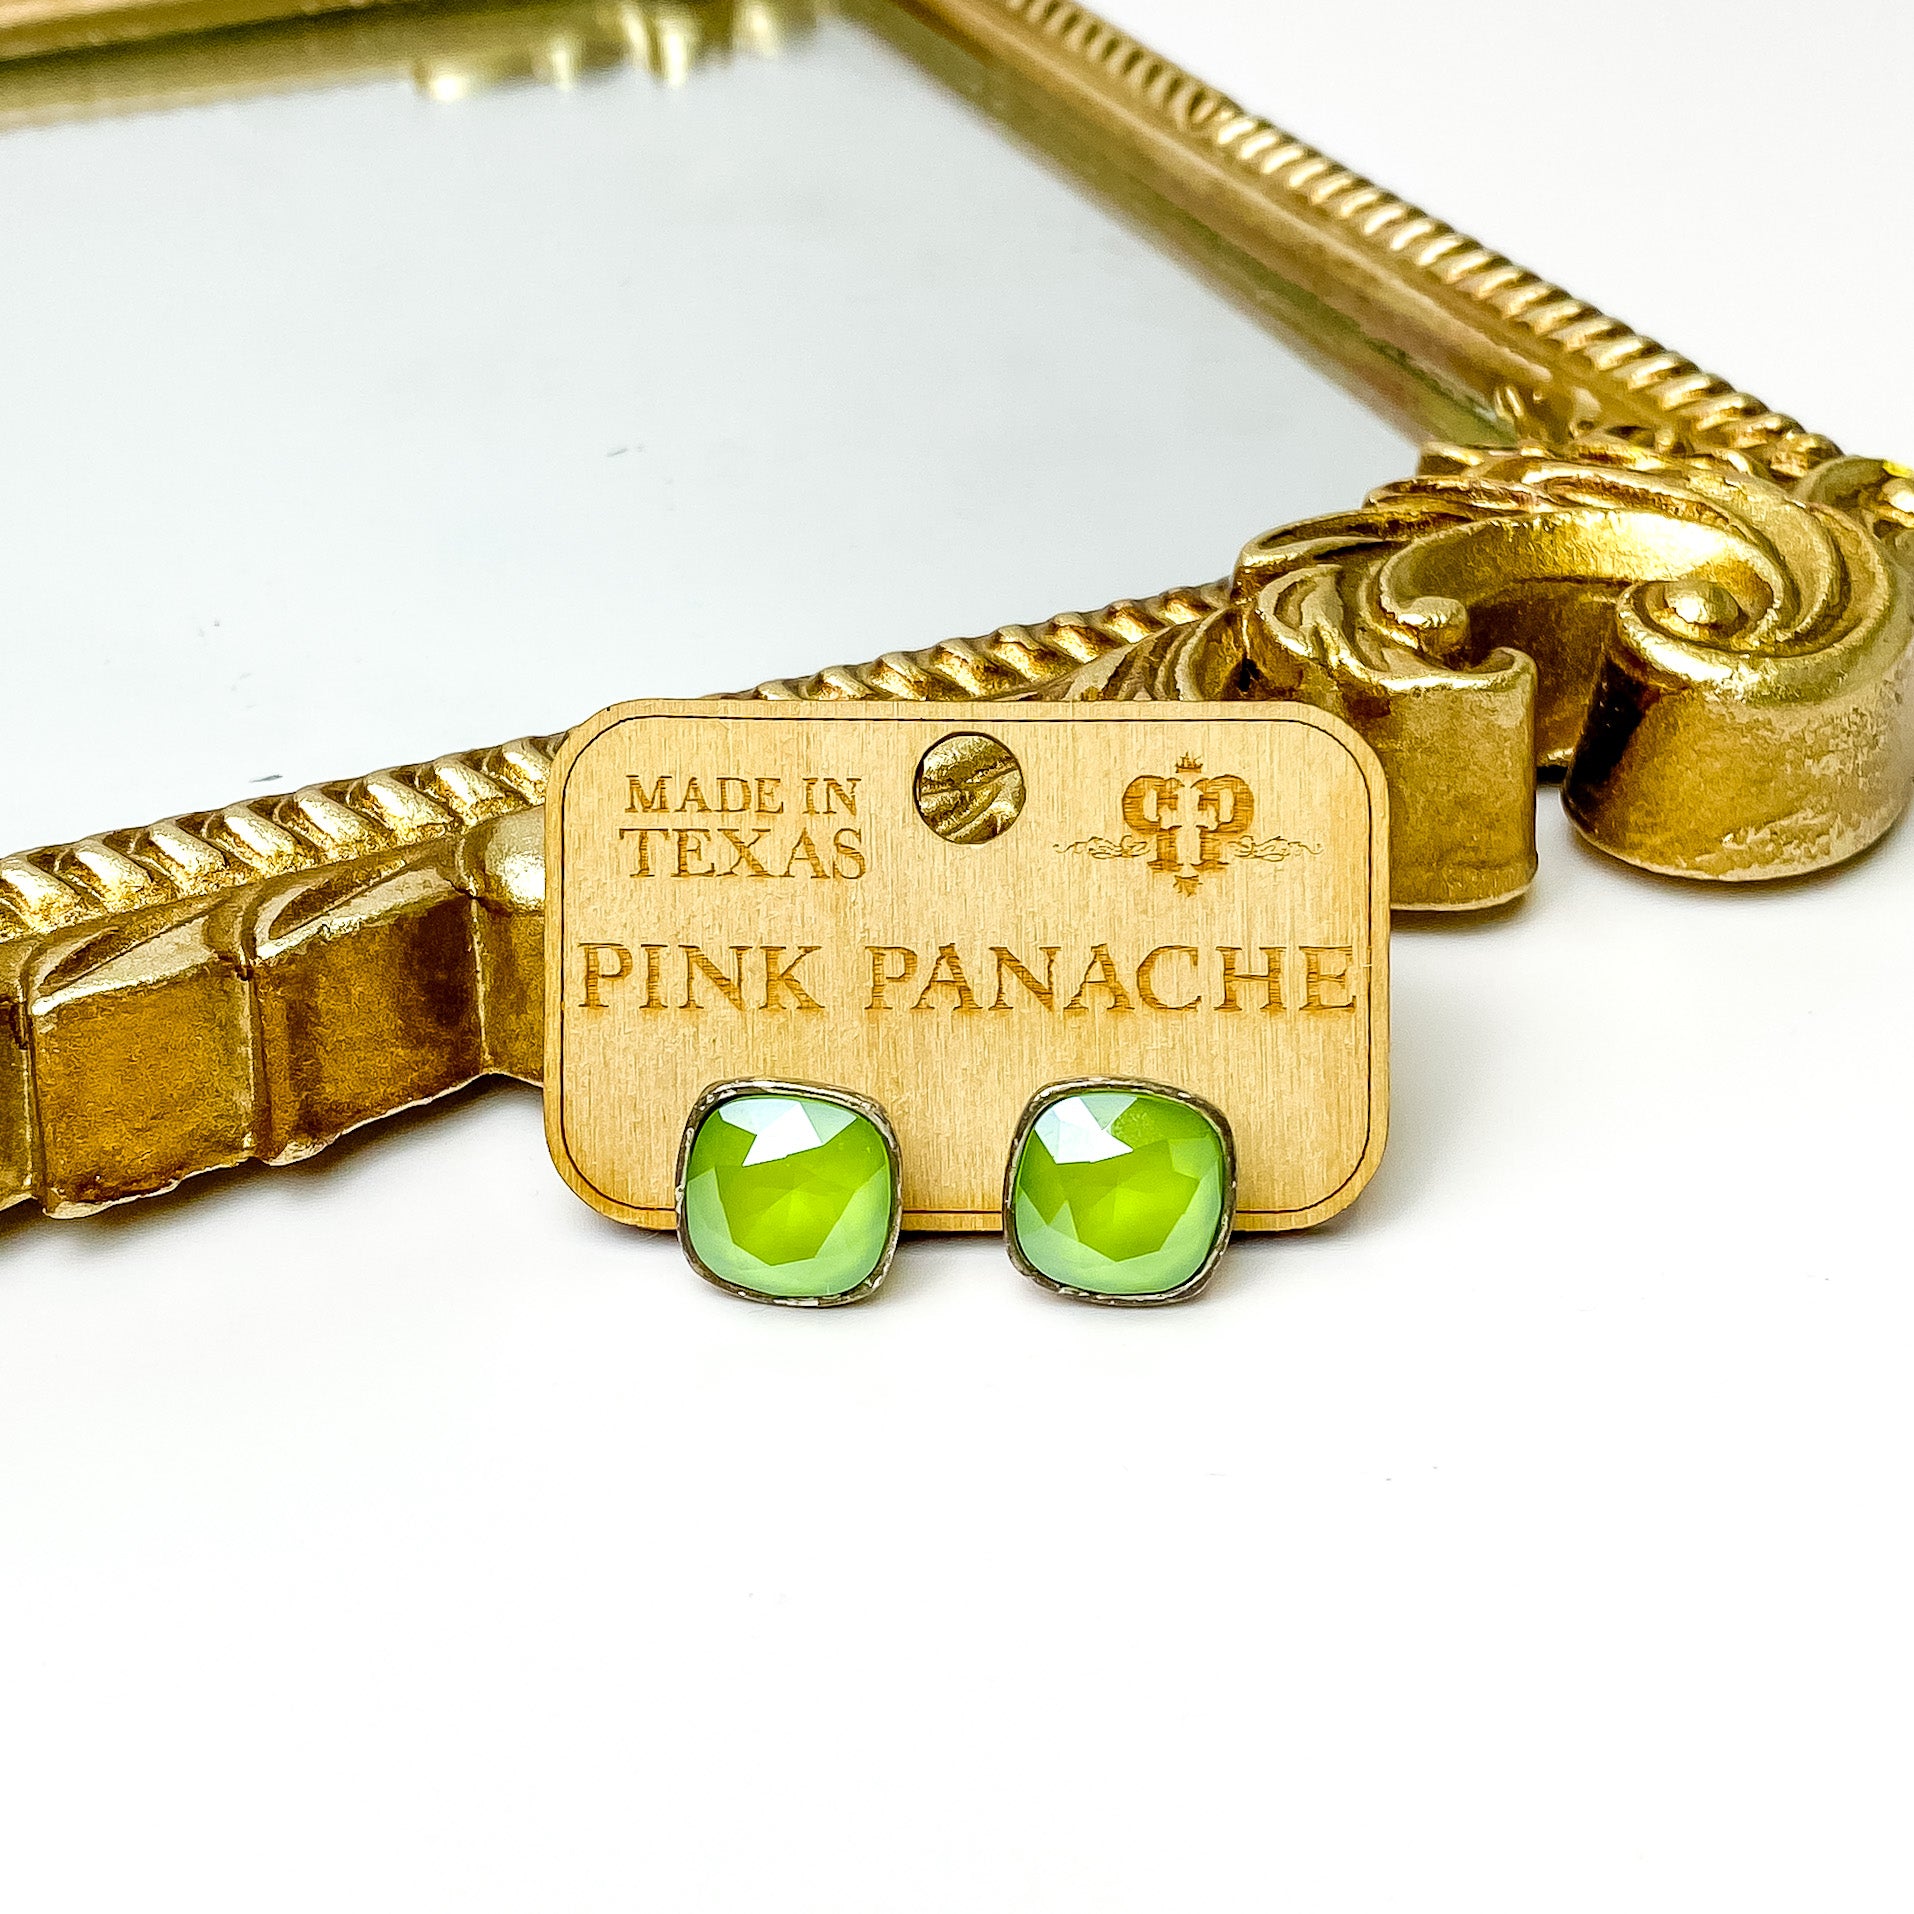 Lime green cushion cut crystal stud earrings with a silver setting. These earrings are pictured on a Pink Panache wood holder in front of a gold mirror and on a white background.